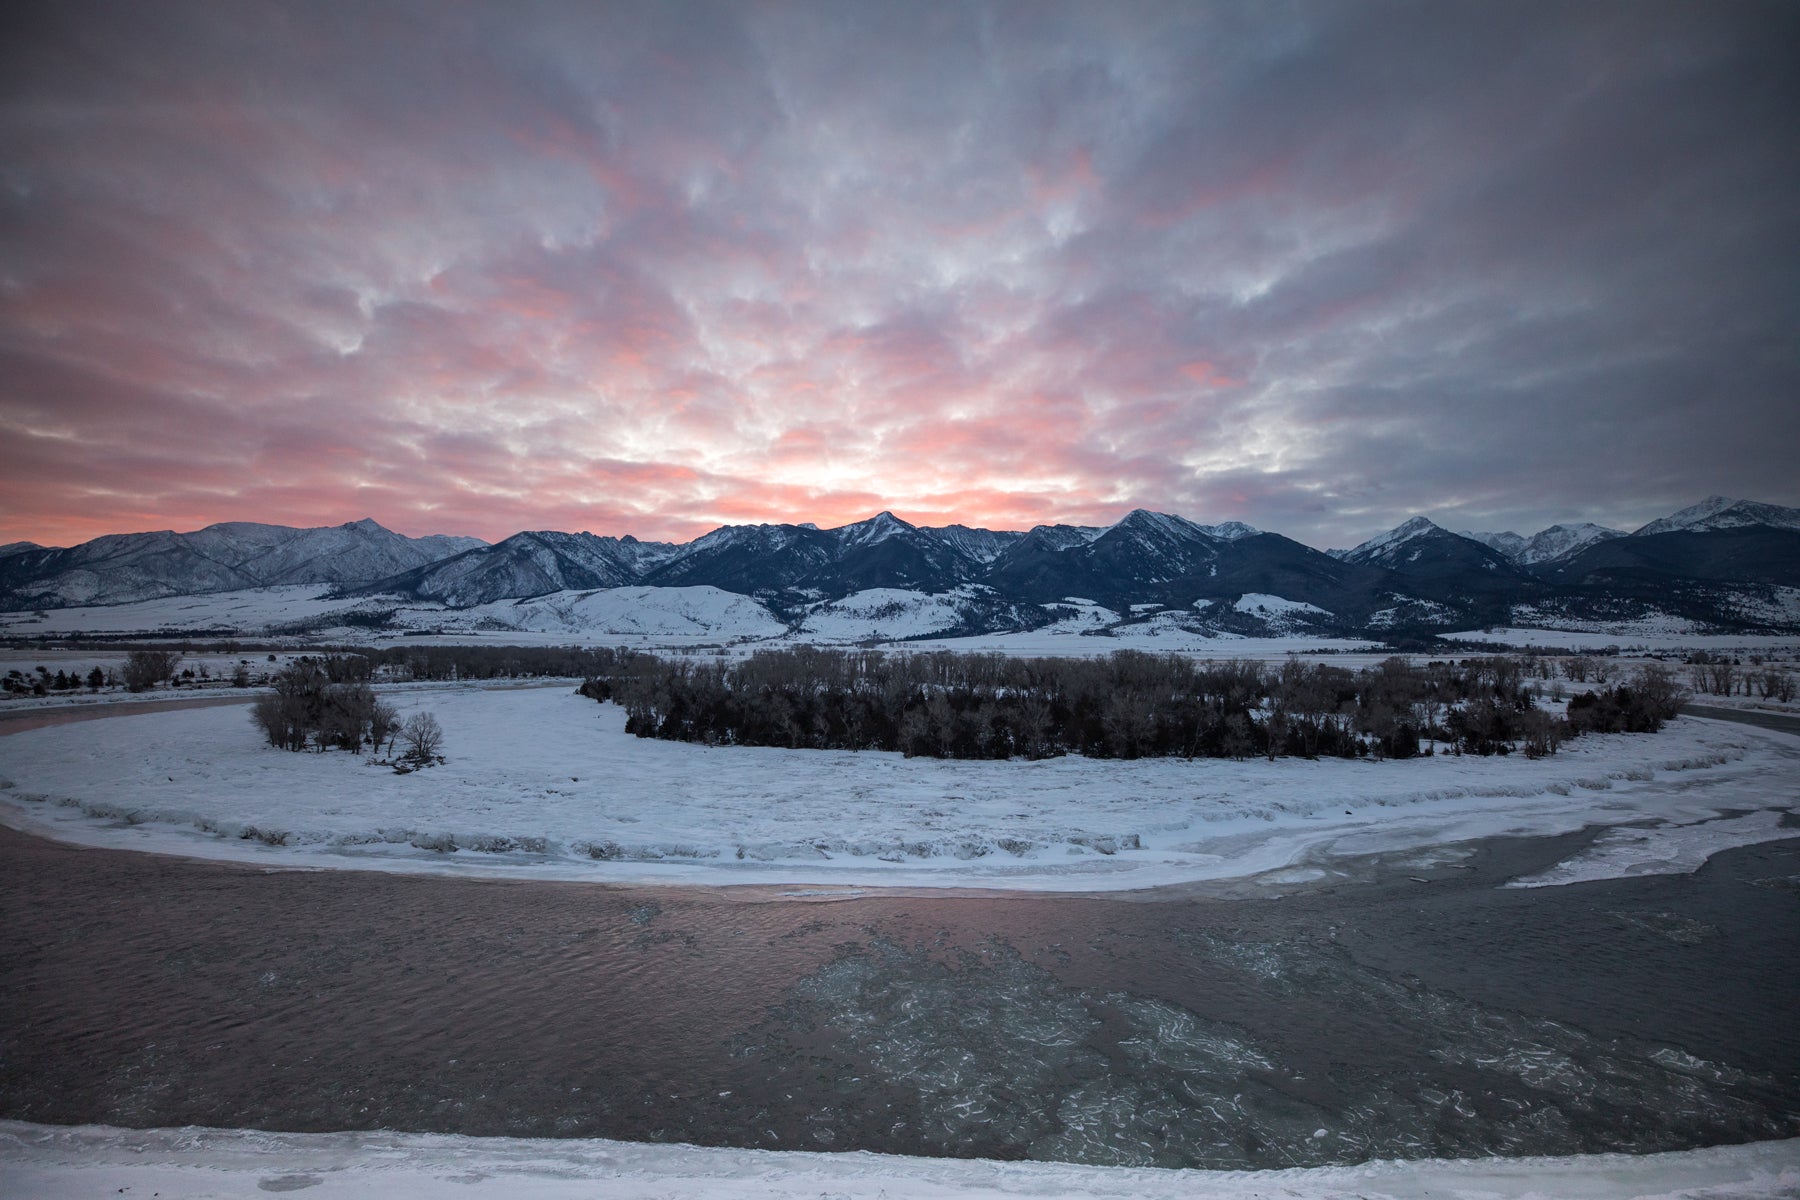 Sunset over snowy mountains in Paradise Valley in Montana.